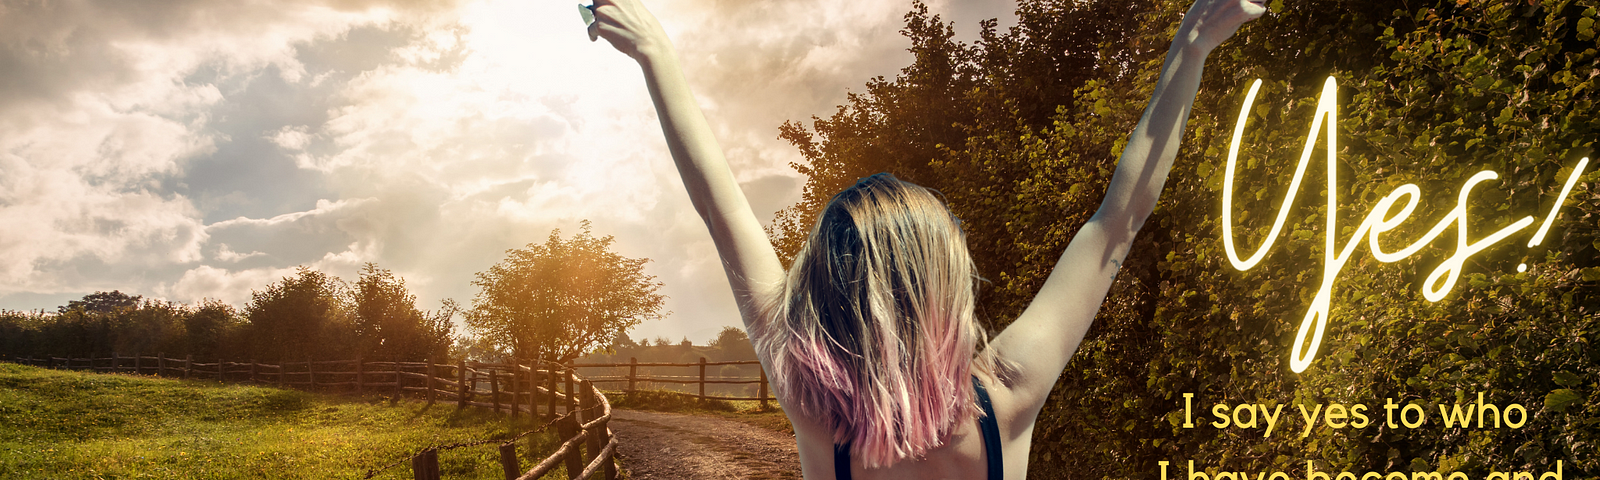 Blonde-haired with pink-dyed ends woman wearing thin-strapped sleeveless black dress standing with back to you, arms raised with hands making peace signs. She is standing in a dirt road with wooden fence and meadow on left and trees lining the path on right. The sky is full of clouds and the sun is shining bright through clouds. Words on right: Yes! I say yes to who I have become and who I am becoming. I embrace all of it.